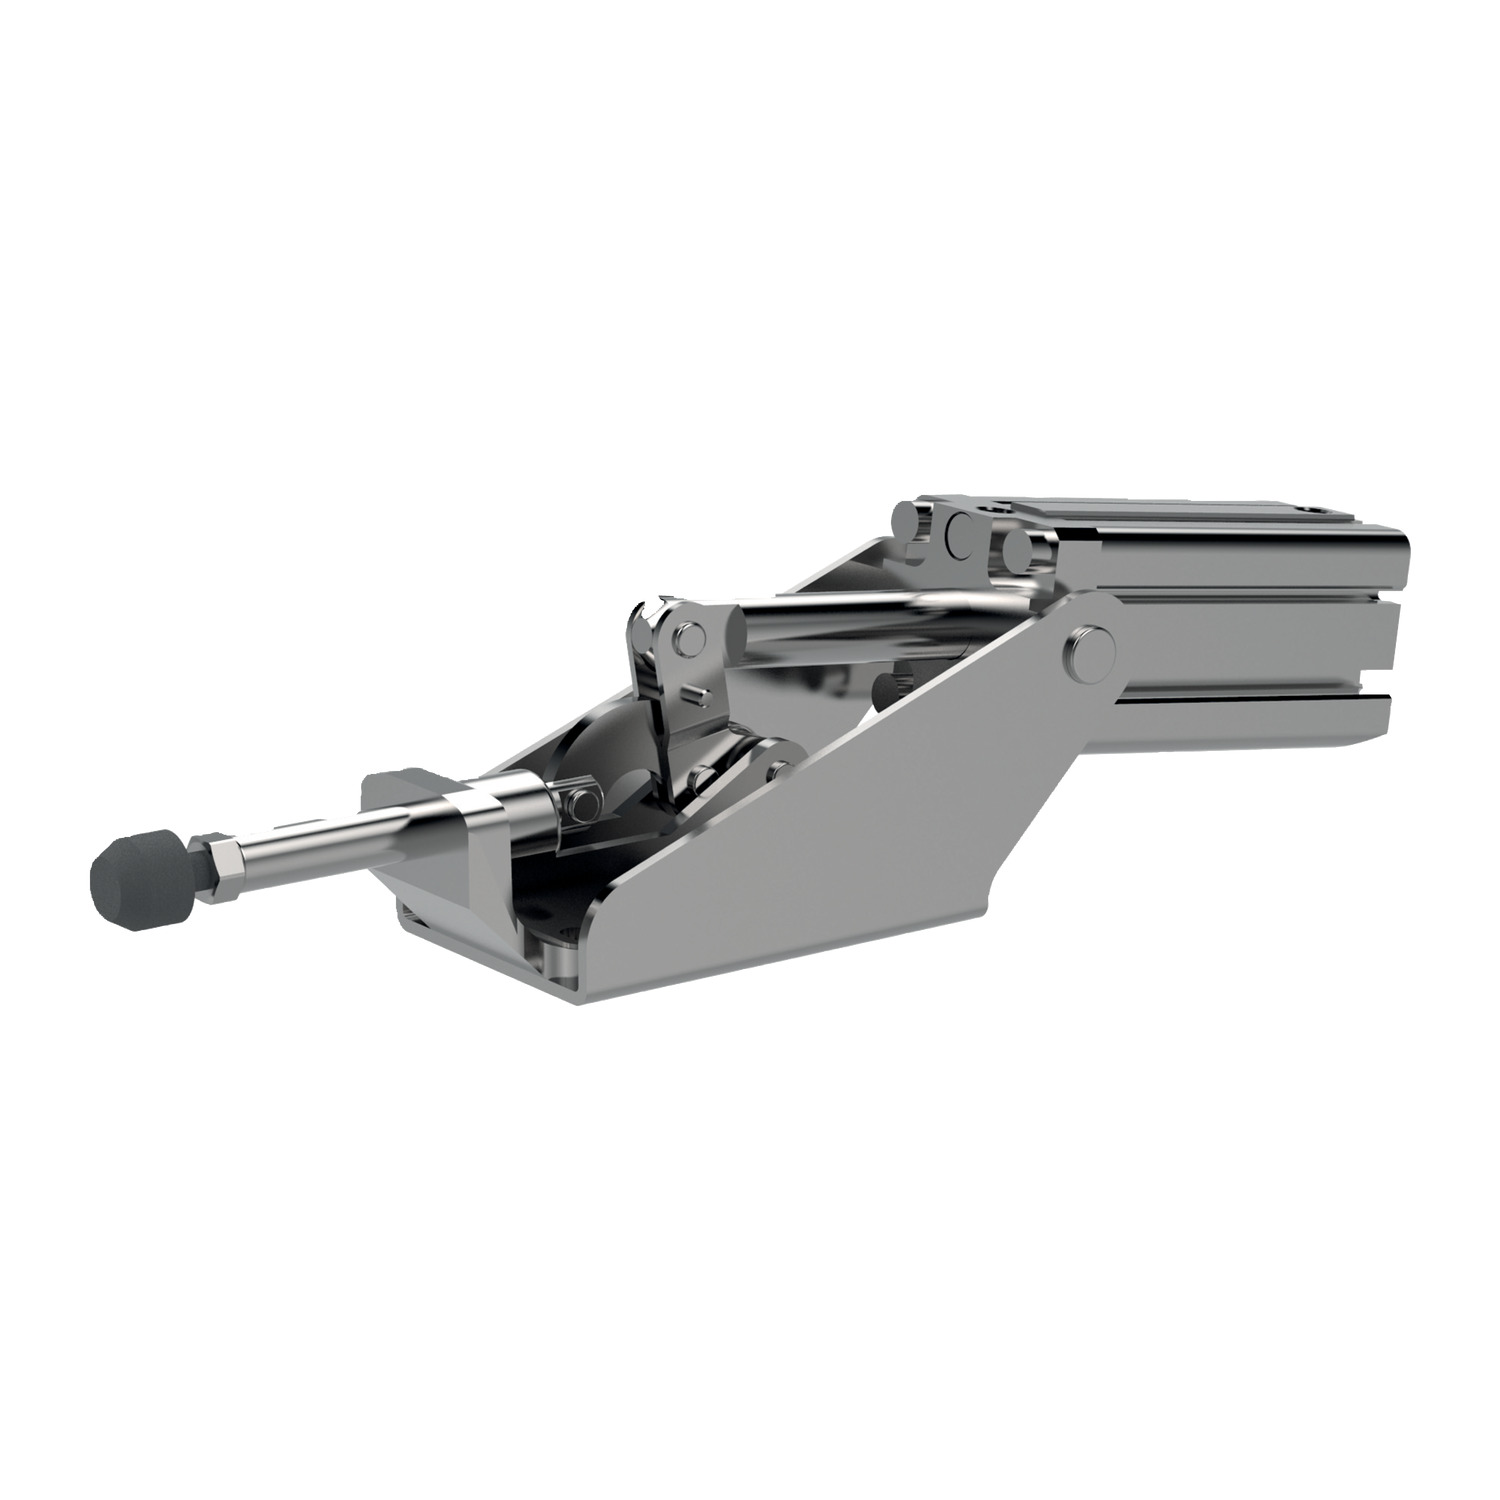 Product 47050, Push Type Pneumatic Toggle Clamp heavy duty version / 